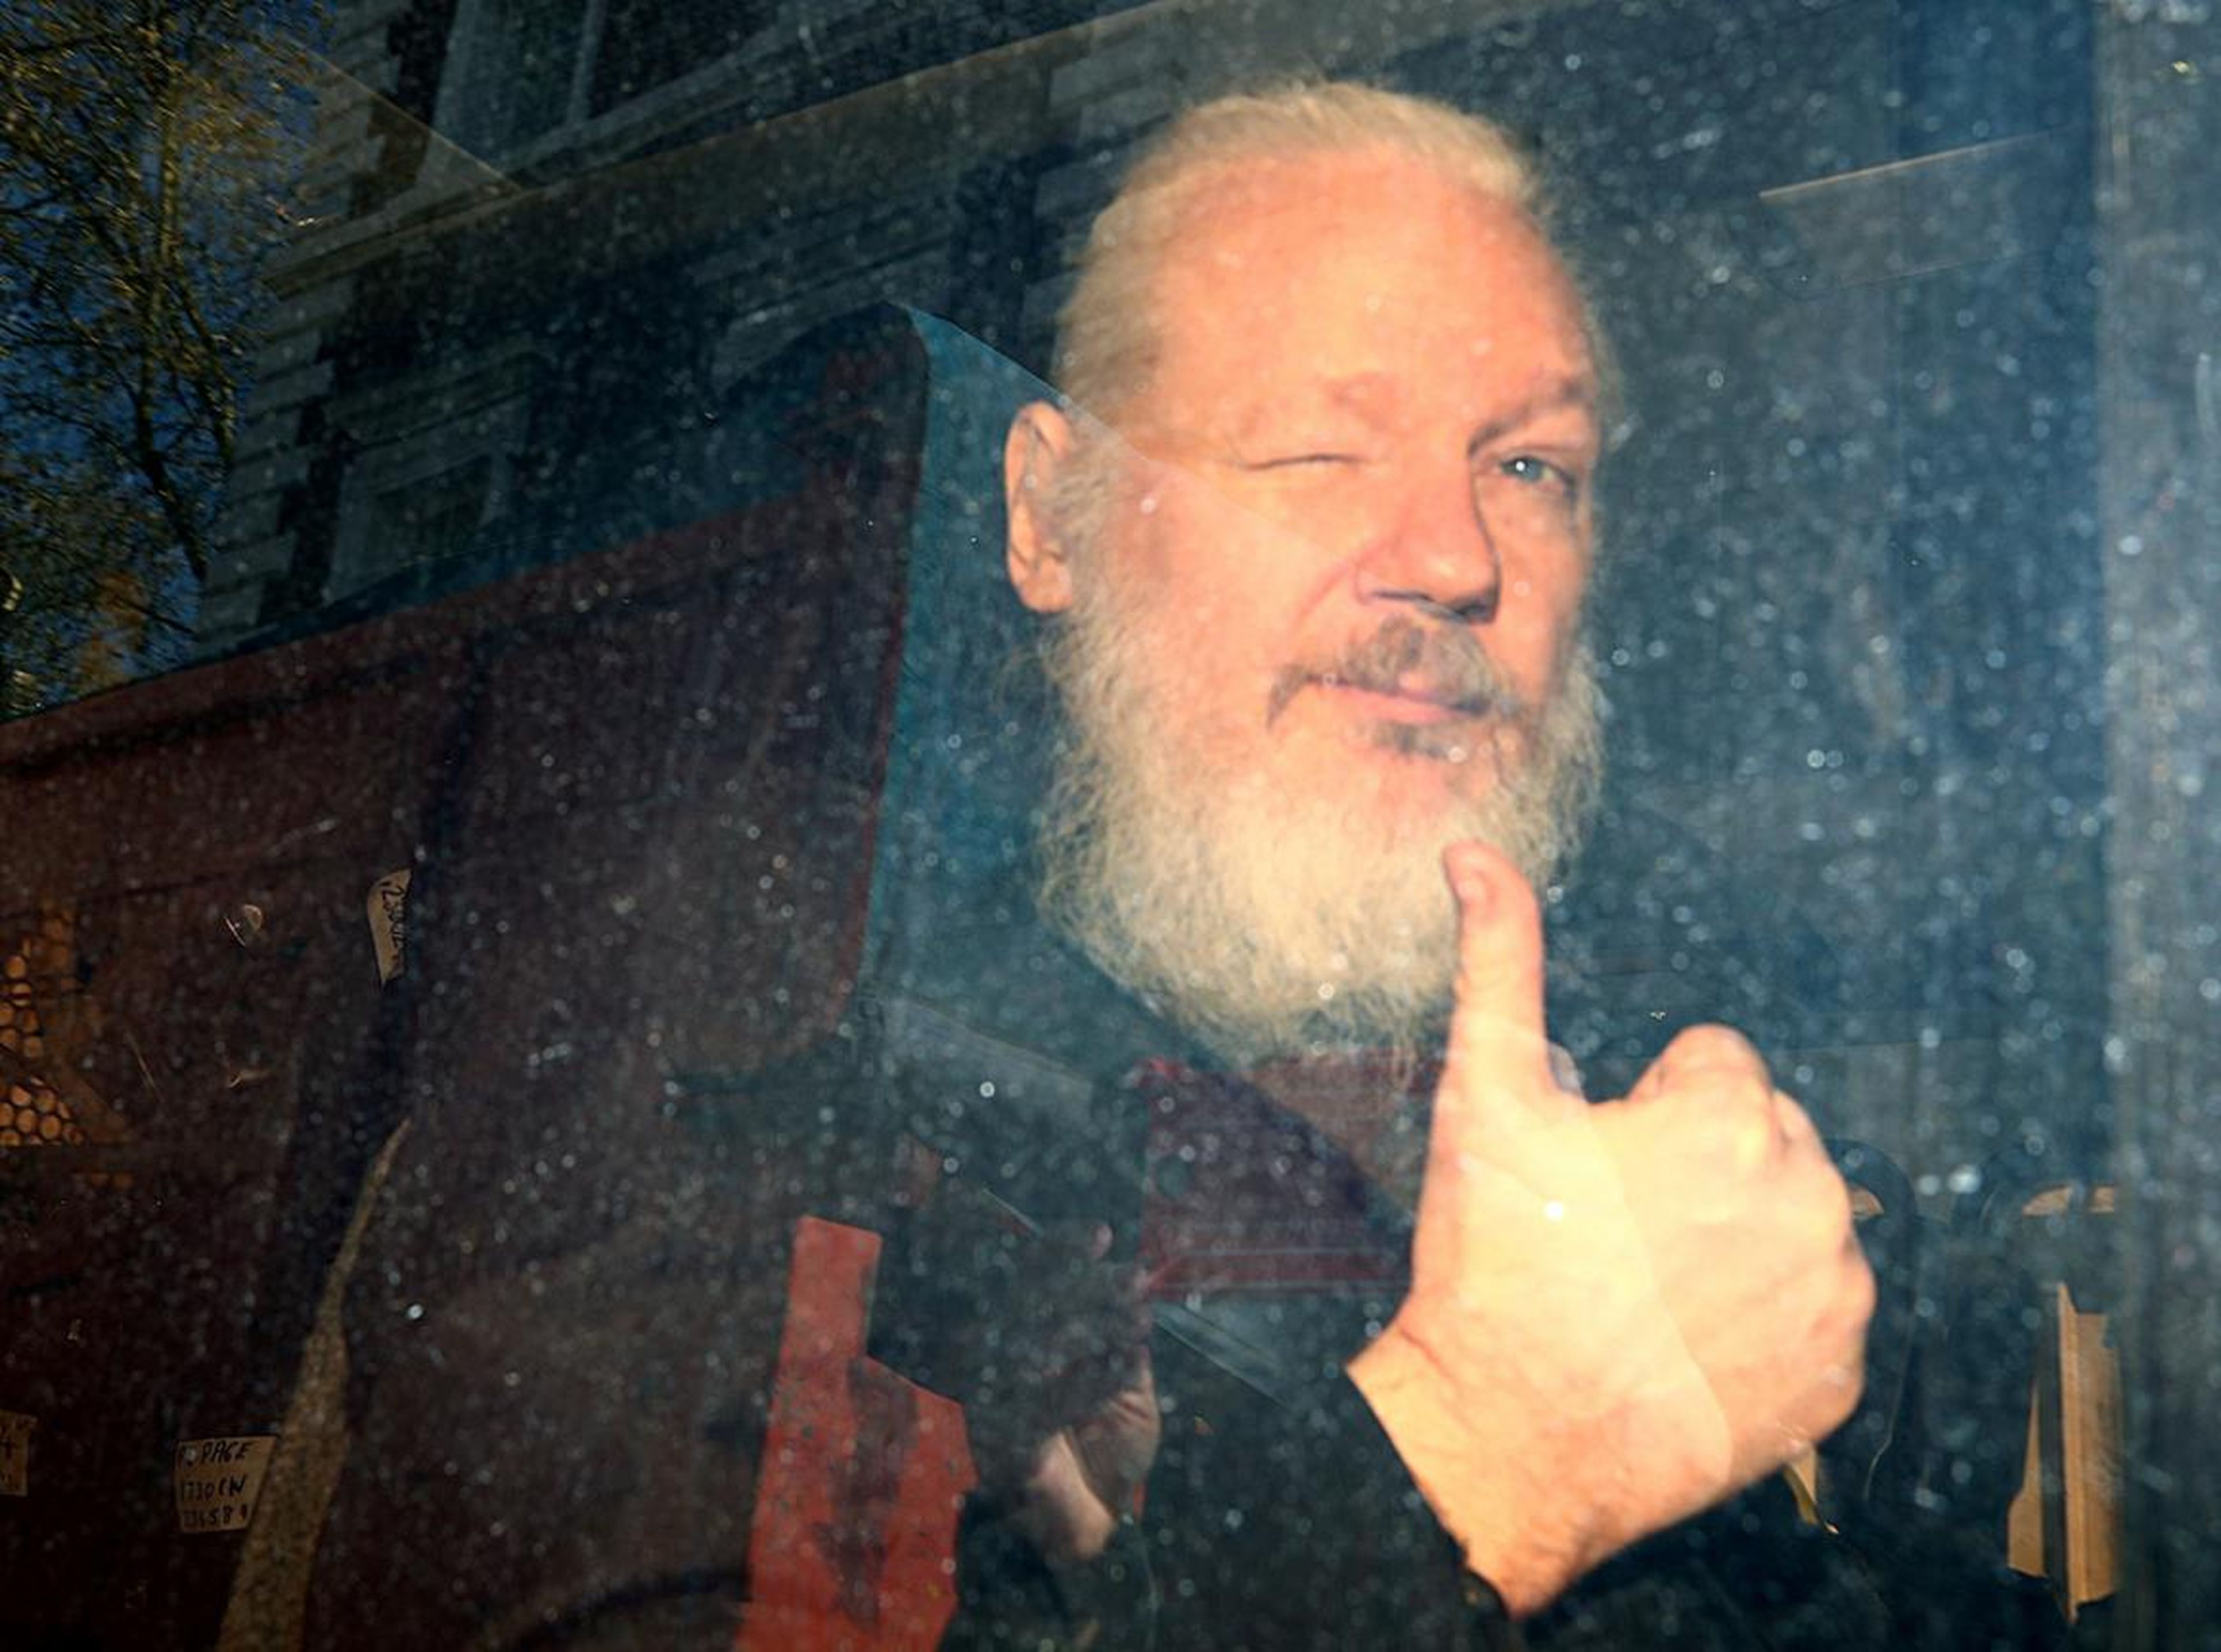 WikiLeaks founder Julian Assange arrives at the Westminster Magistrates Court after he was arrested in London on April 11, following several years of living inside the Ecuadorian embassy, near the famed Harrods department store.